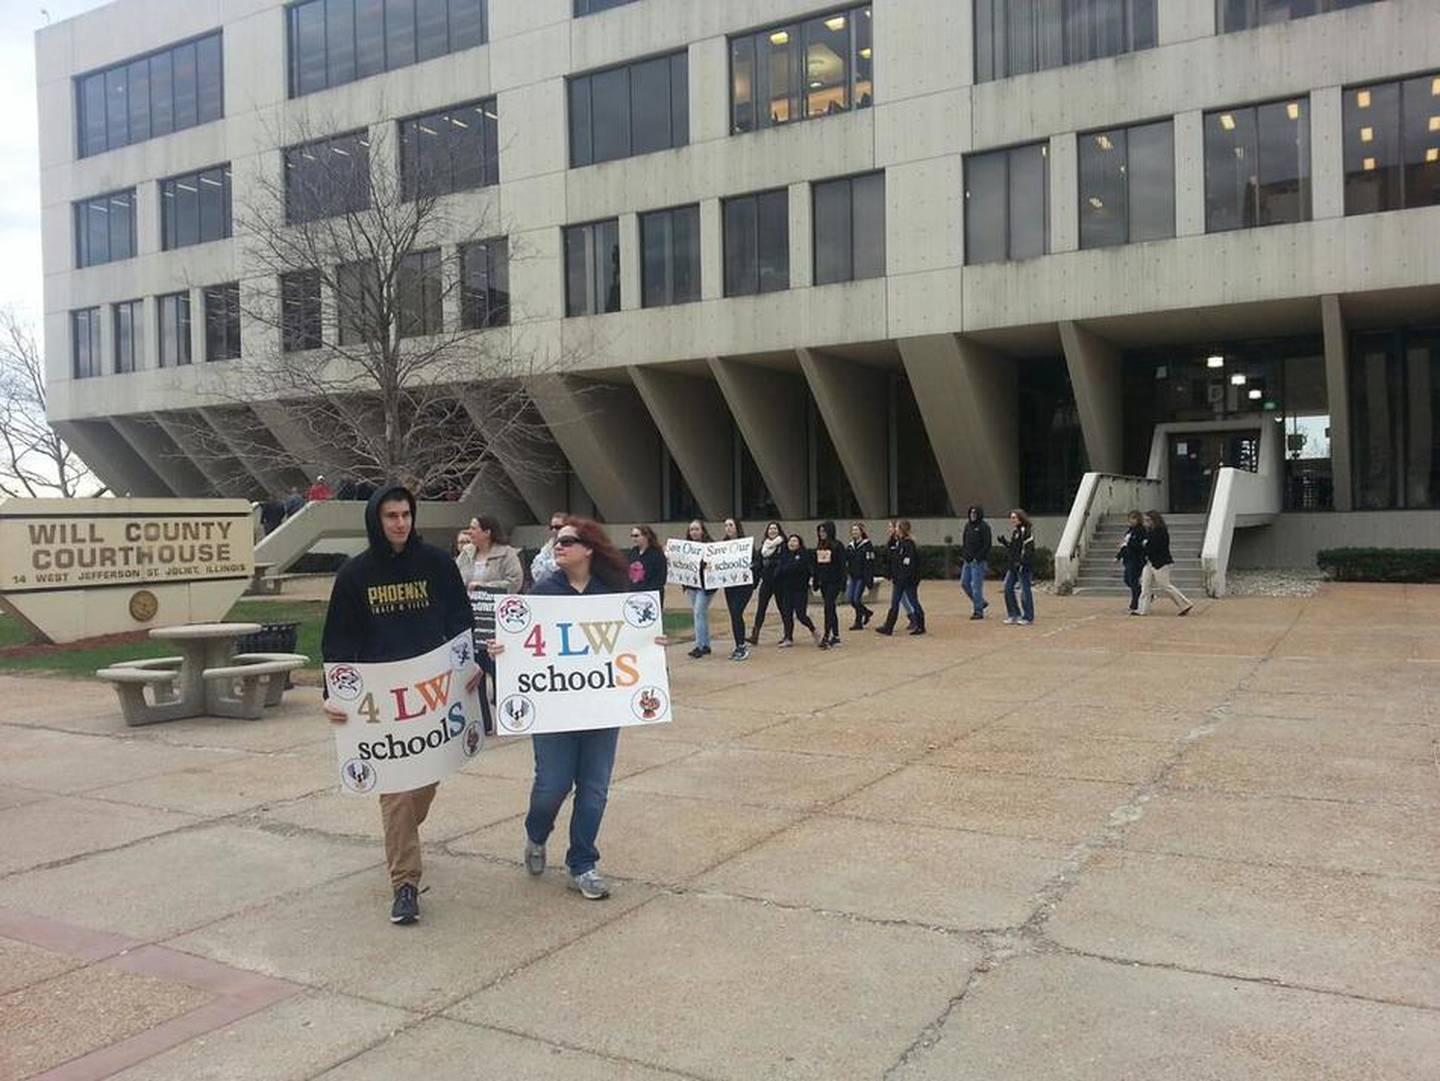 Lincoln-Way Area Taxpayers Unite rally Wednesday in front of the Will County Courthouse before a court appearance.